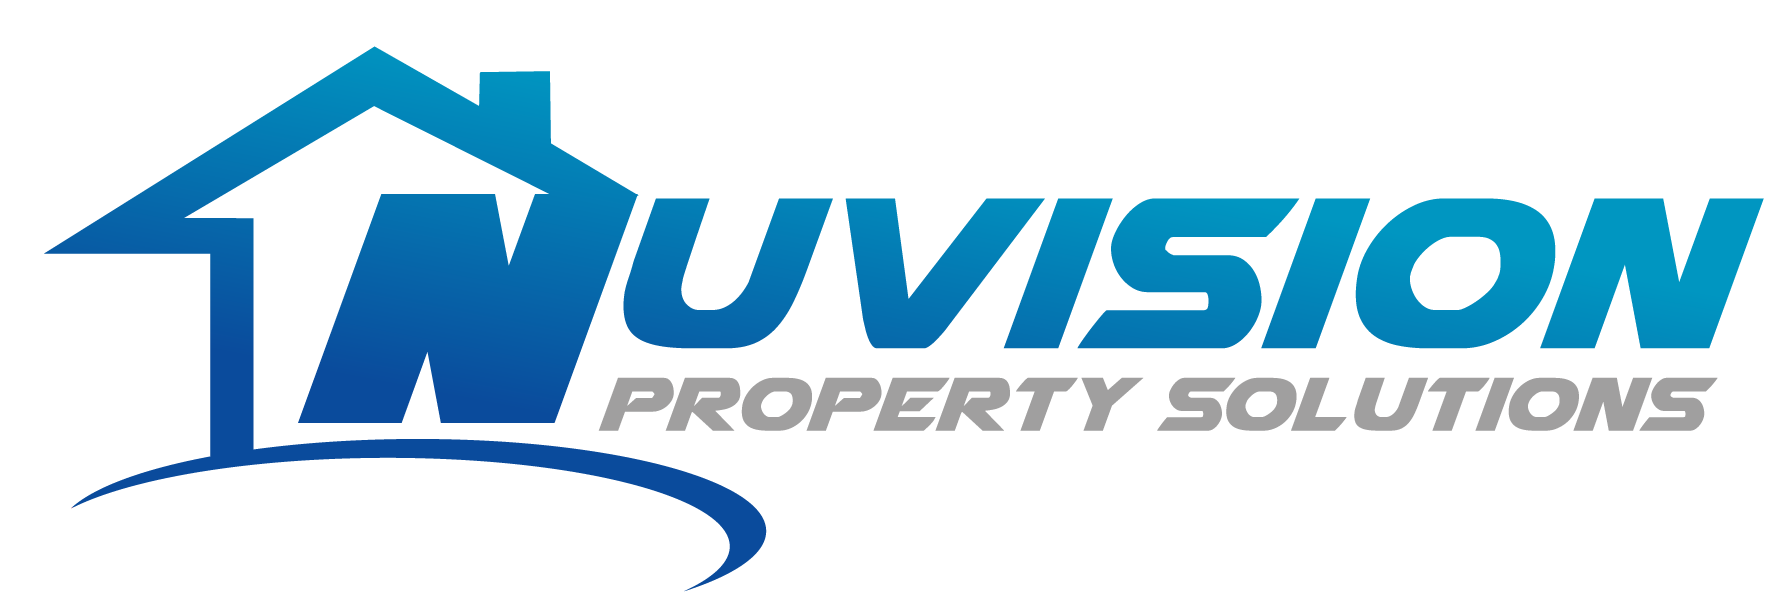 Nuvision Property Solutions, LLC